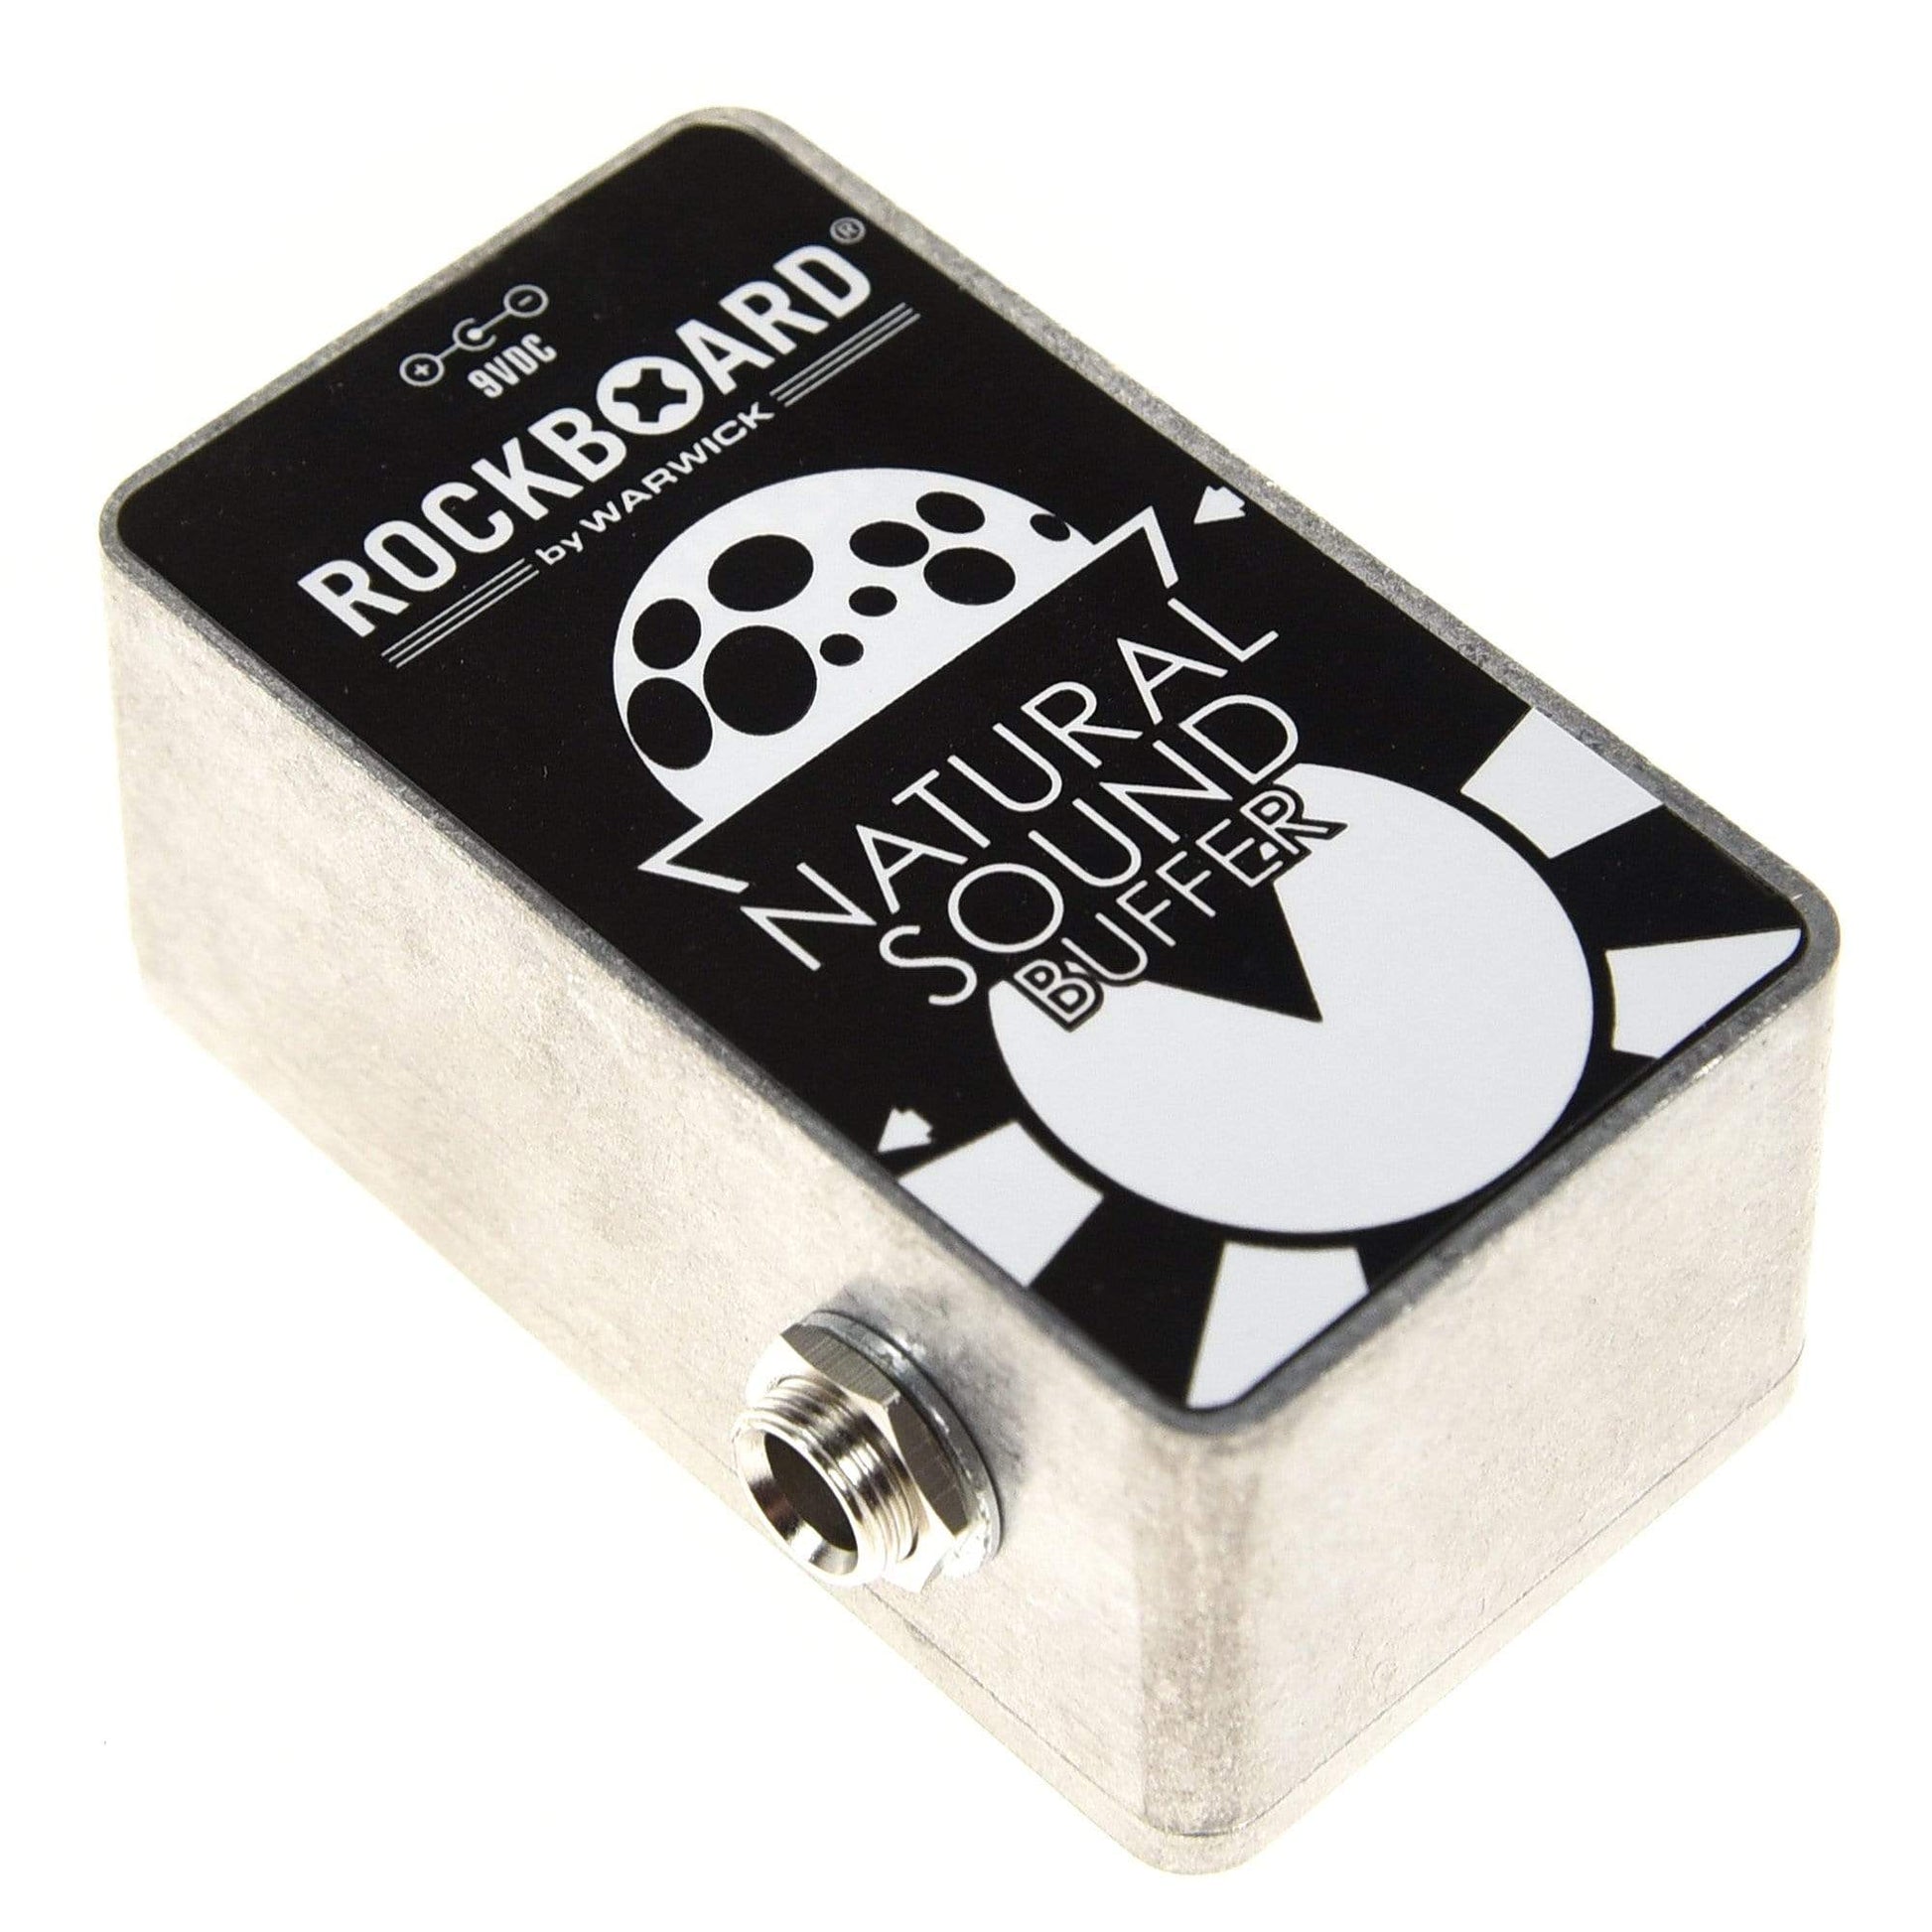 RockGear RockBoard Natural Sound Buffer Effects and Pedals / Controllers, Volume and Expression